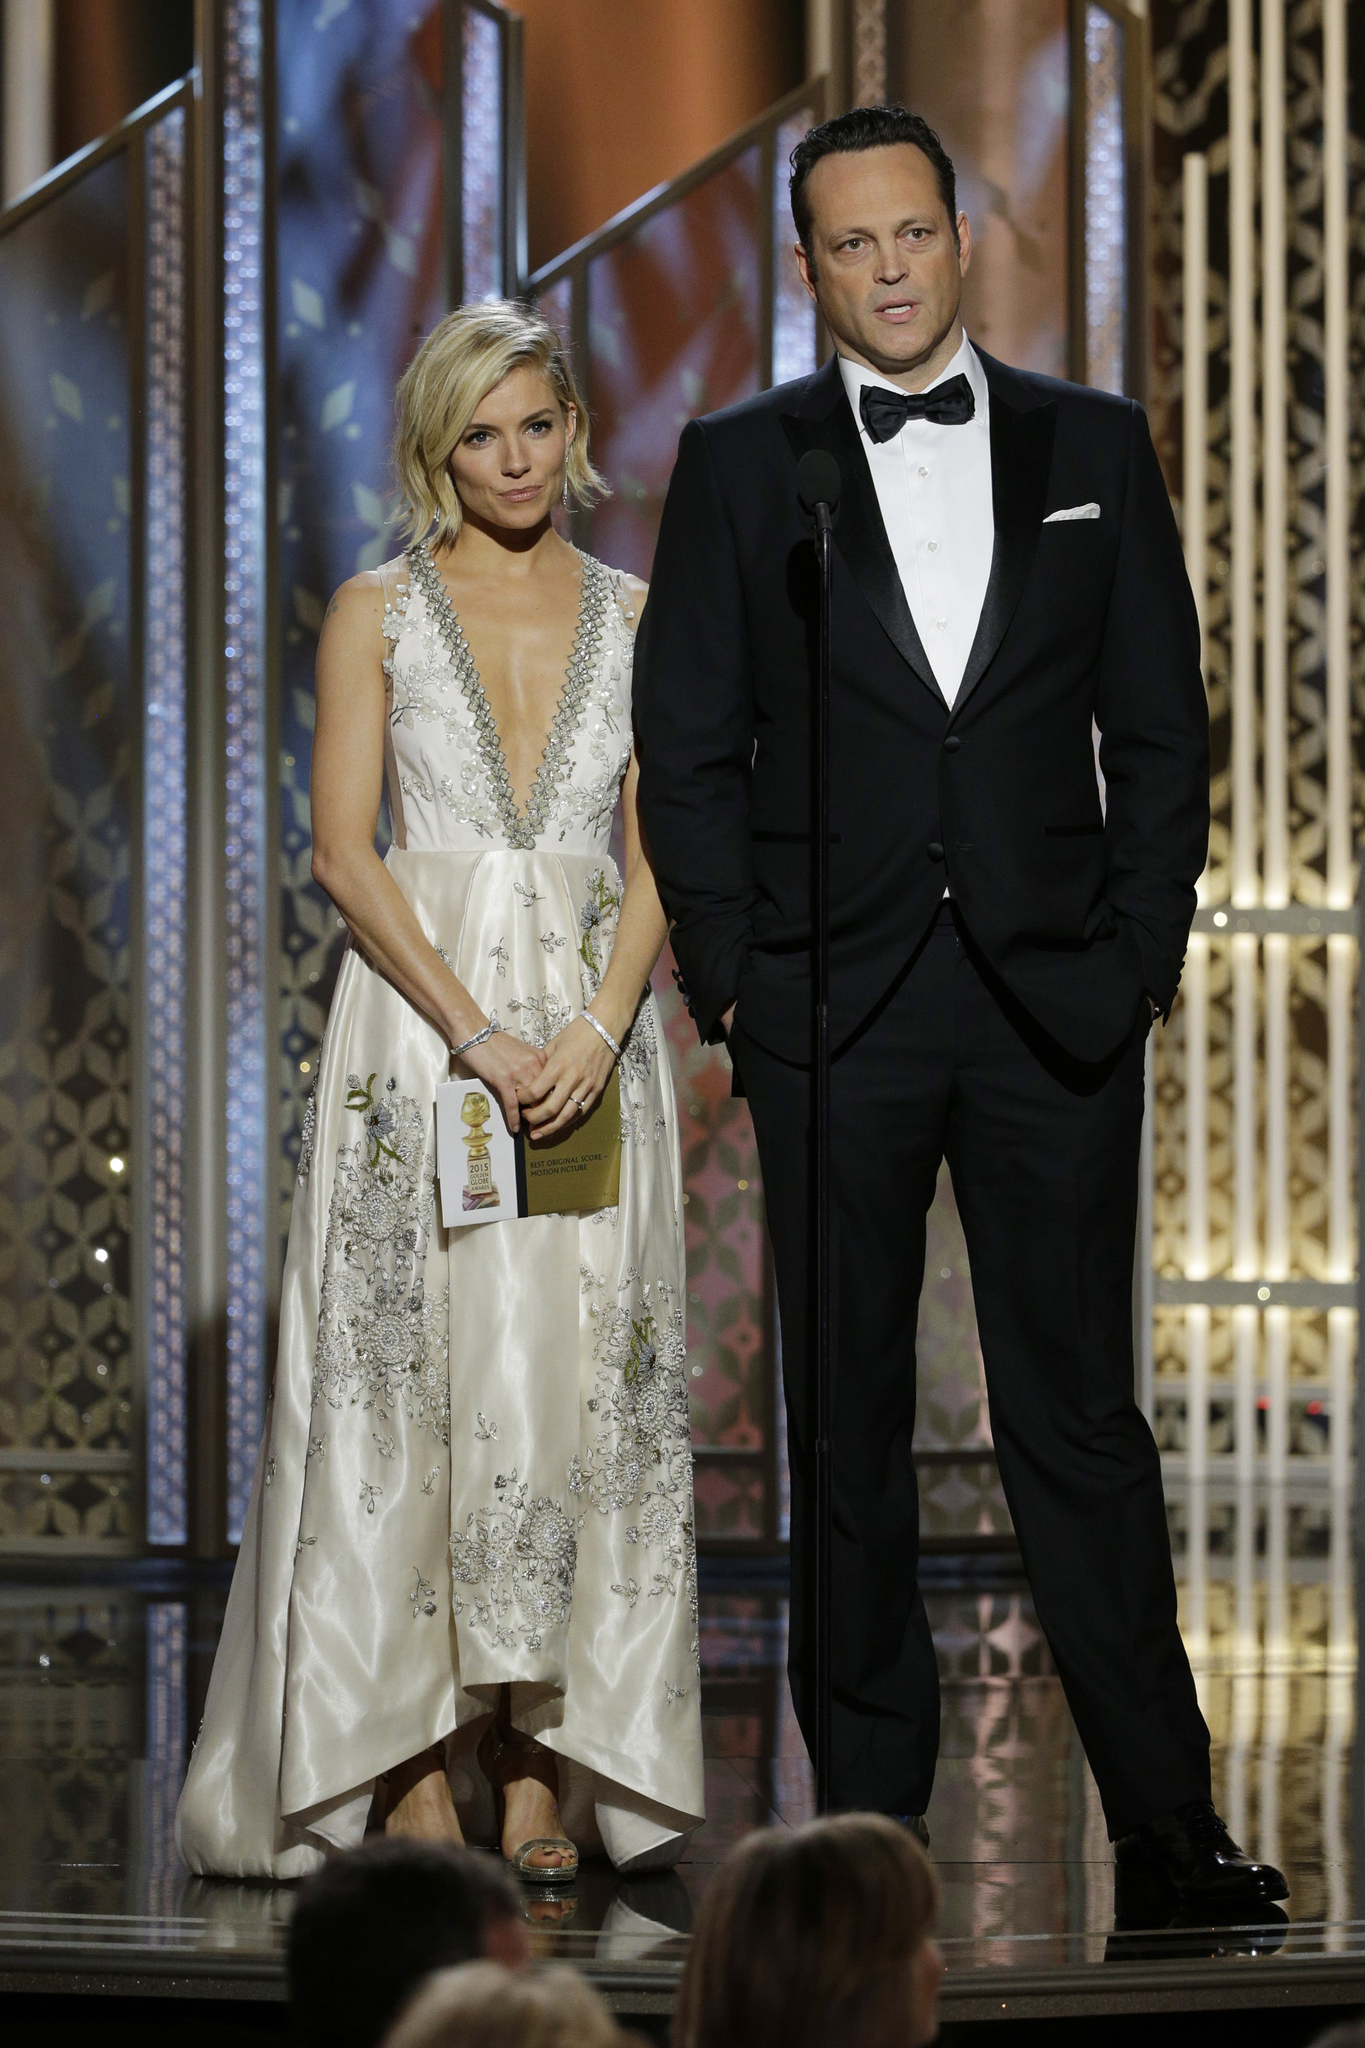 Vince Vaughn and Sienna Miller at event of 72nd Golden Globe Awards (2015)